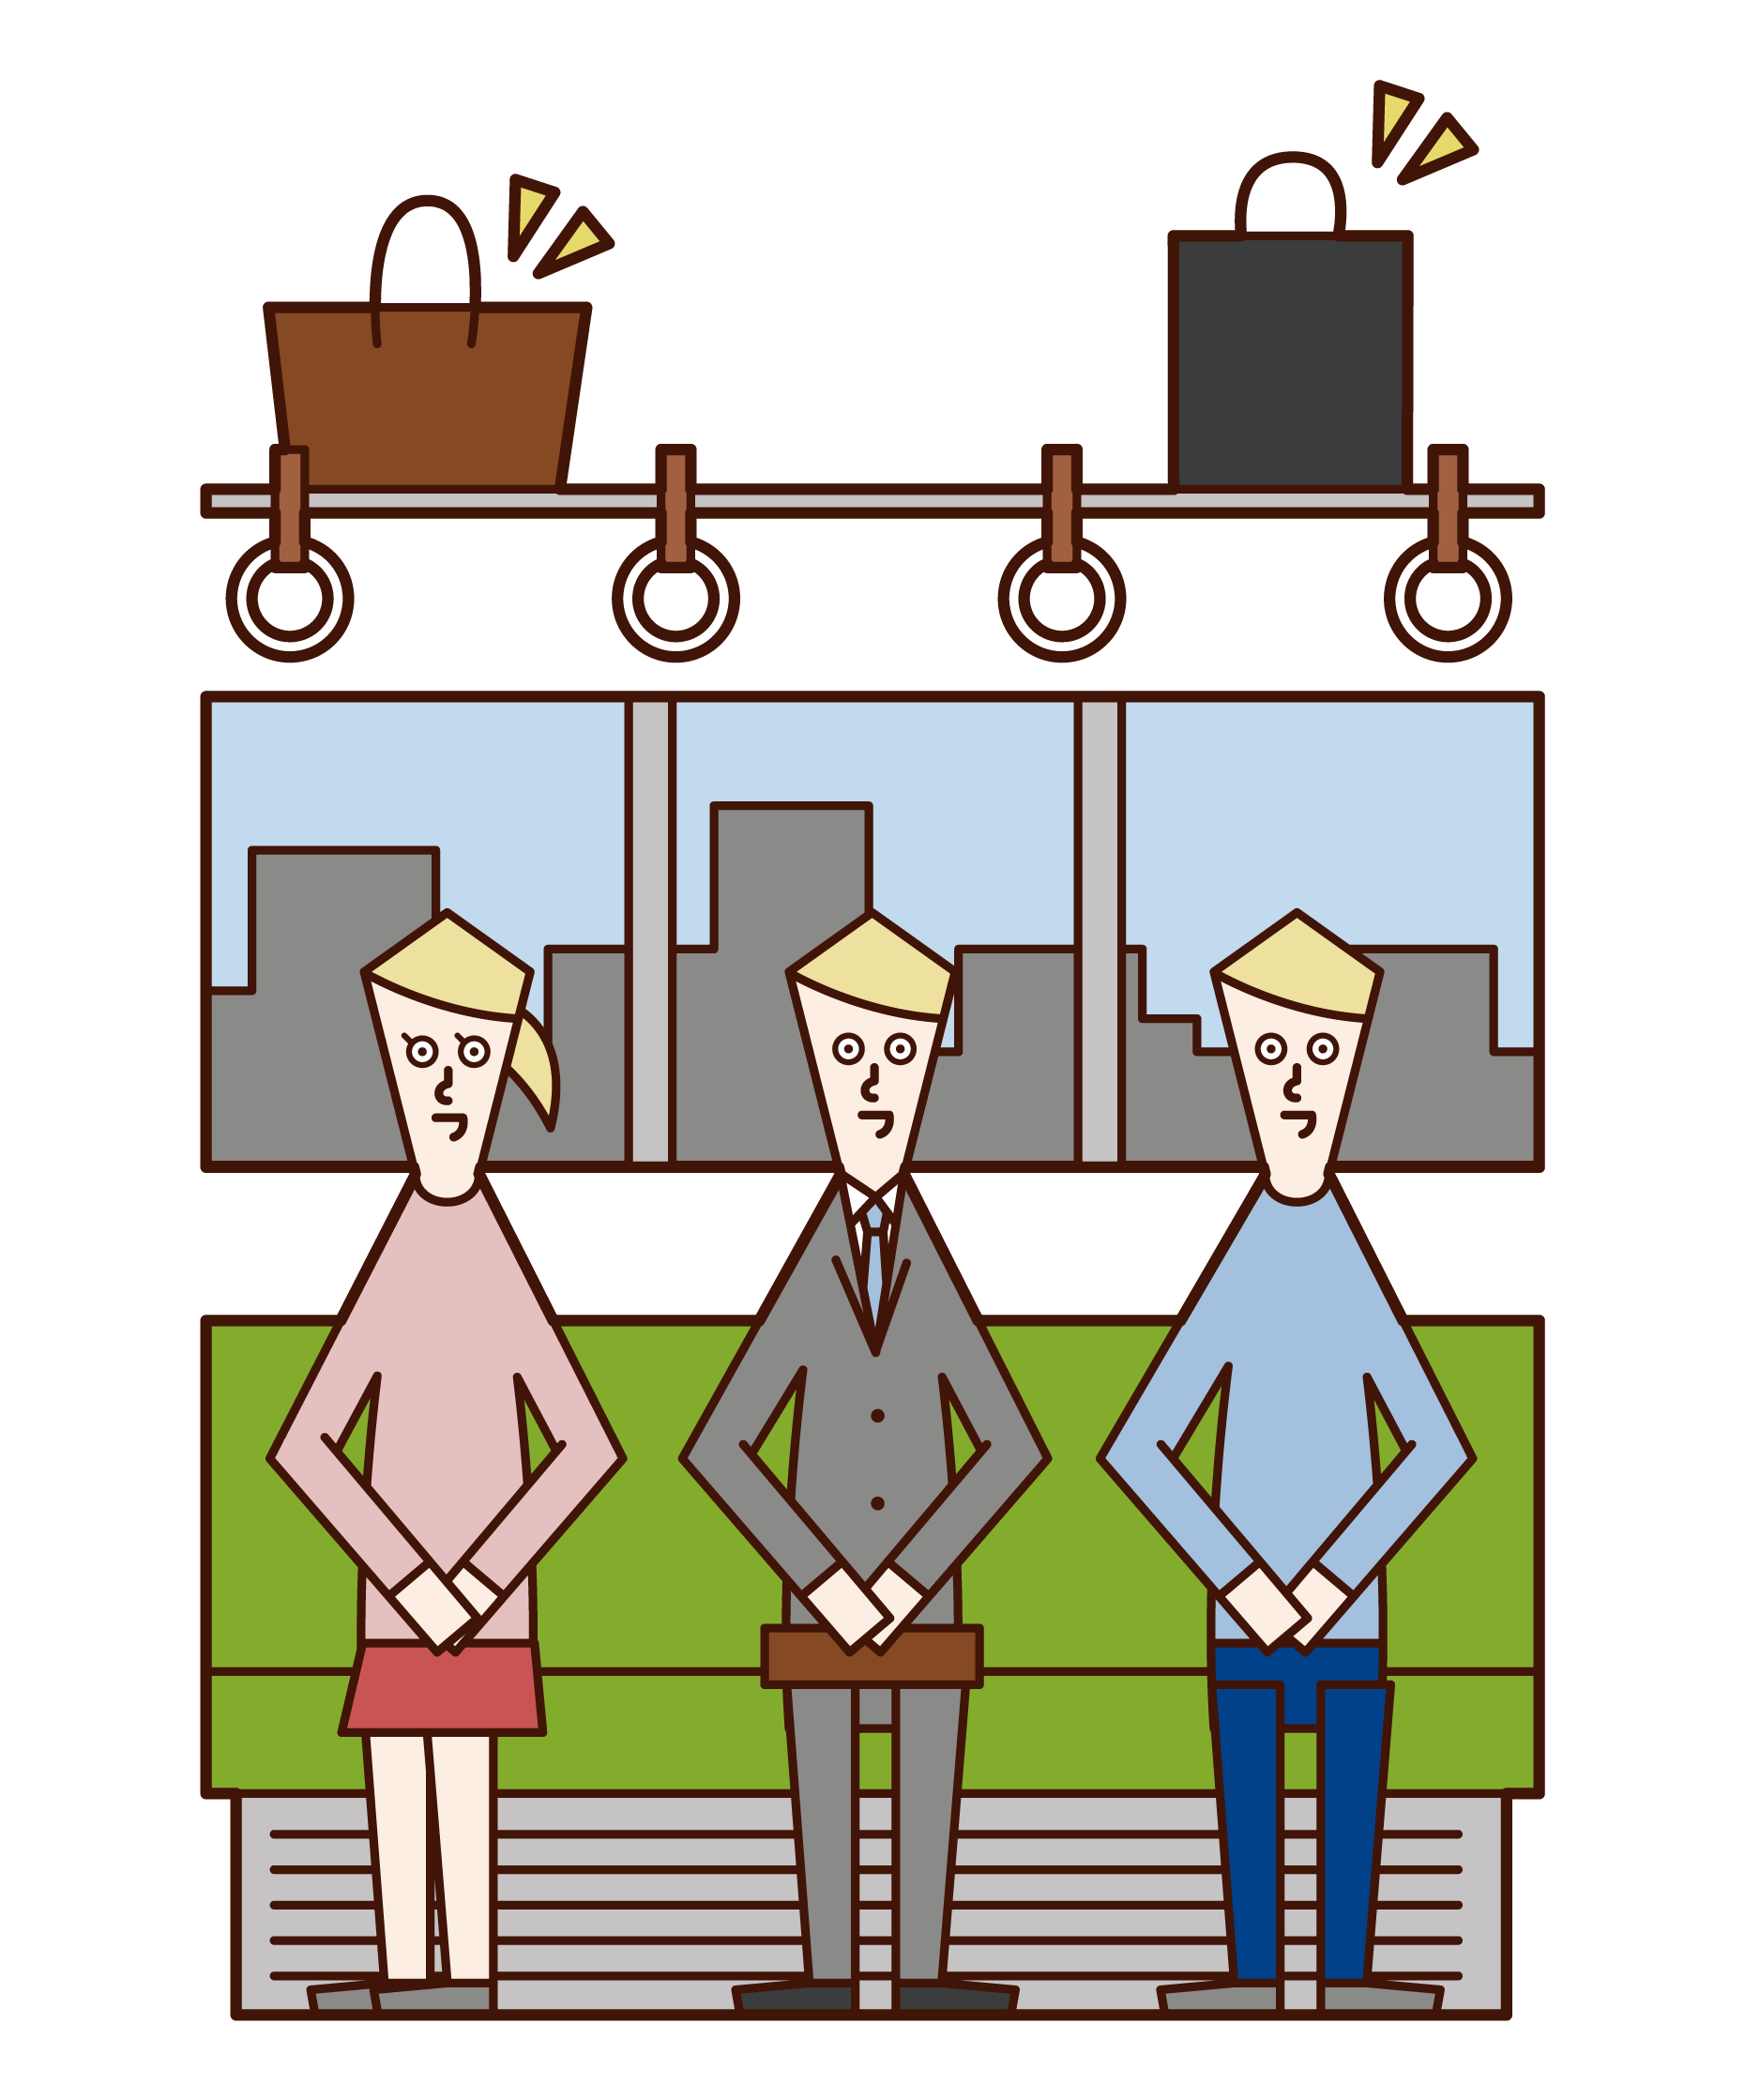 Illustration of a person putting his luggage on a net shelf on a train